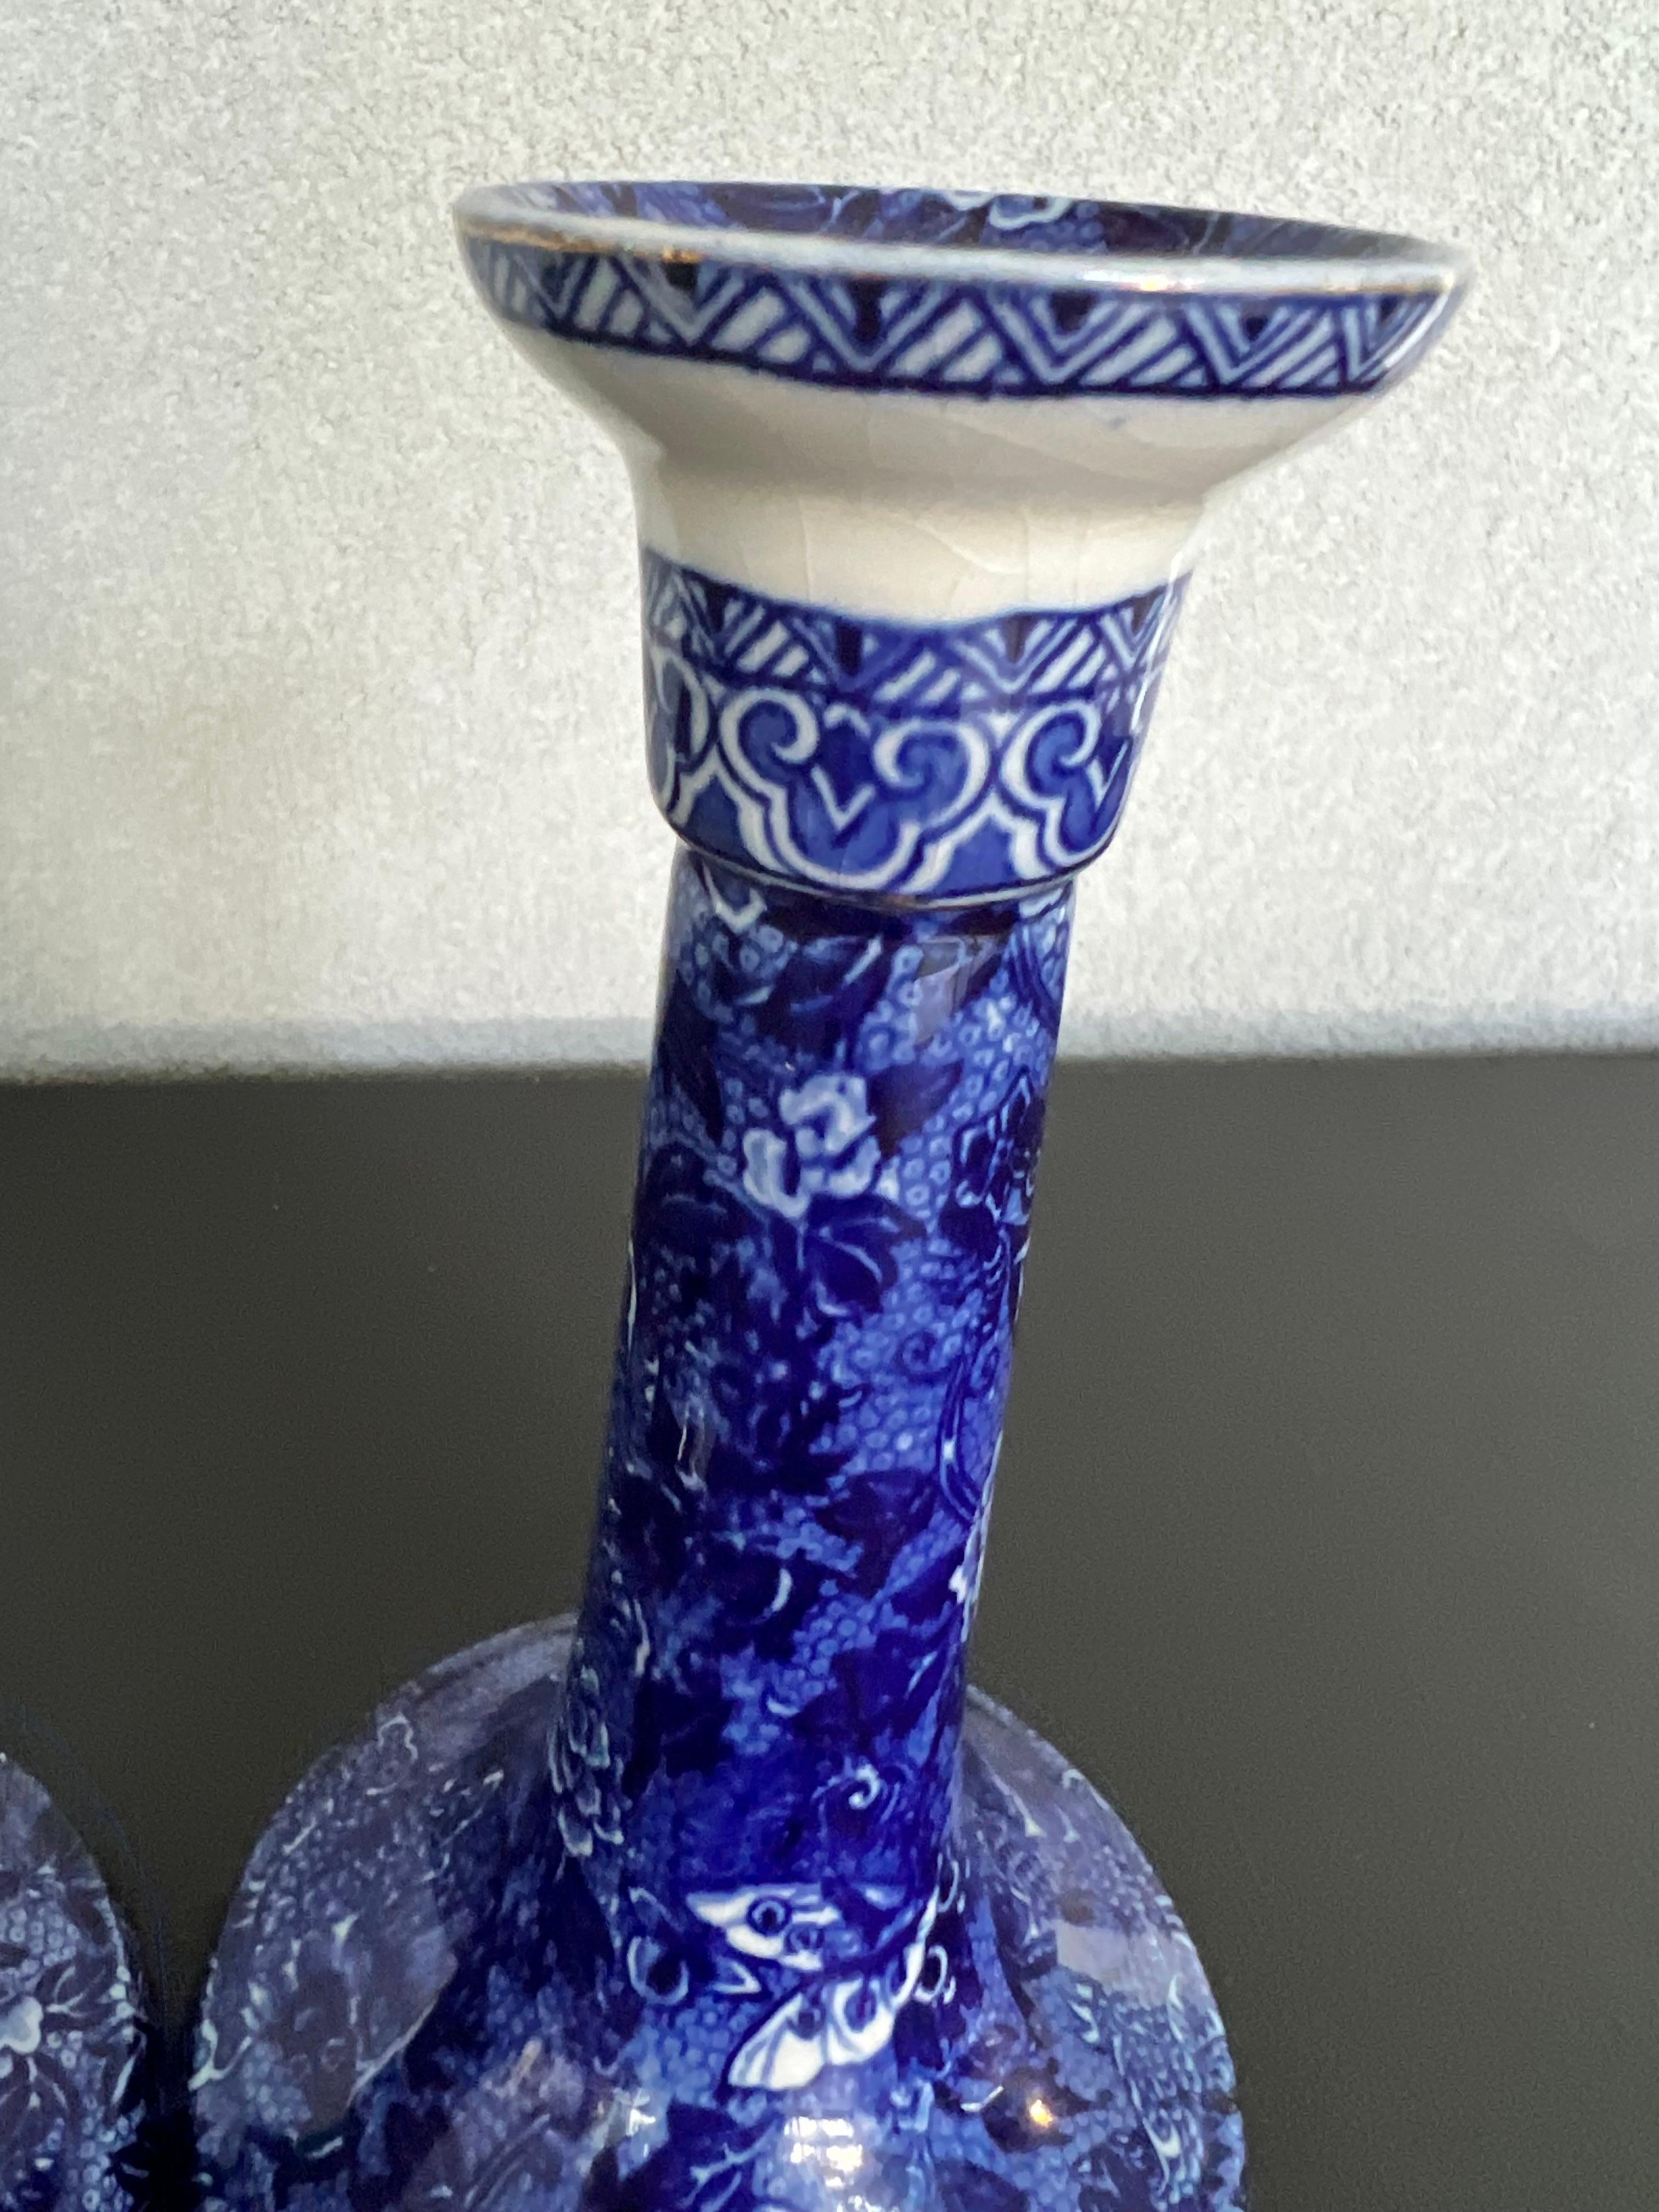 Gorgeous pair of porcelain hand-painted candlesticks made by Shelly in England 
Deep blue color is striking, the rim has lost the gold edge but they still look amazing and would add a touch of color to any room 
stamped and number on bottom  